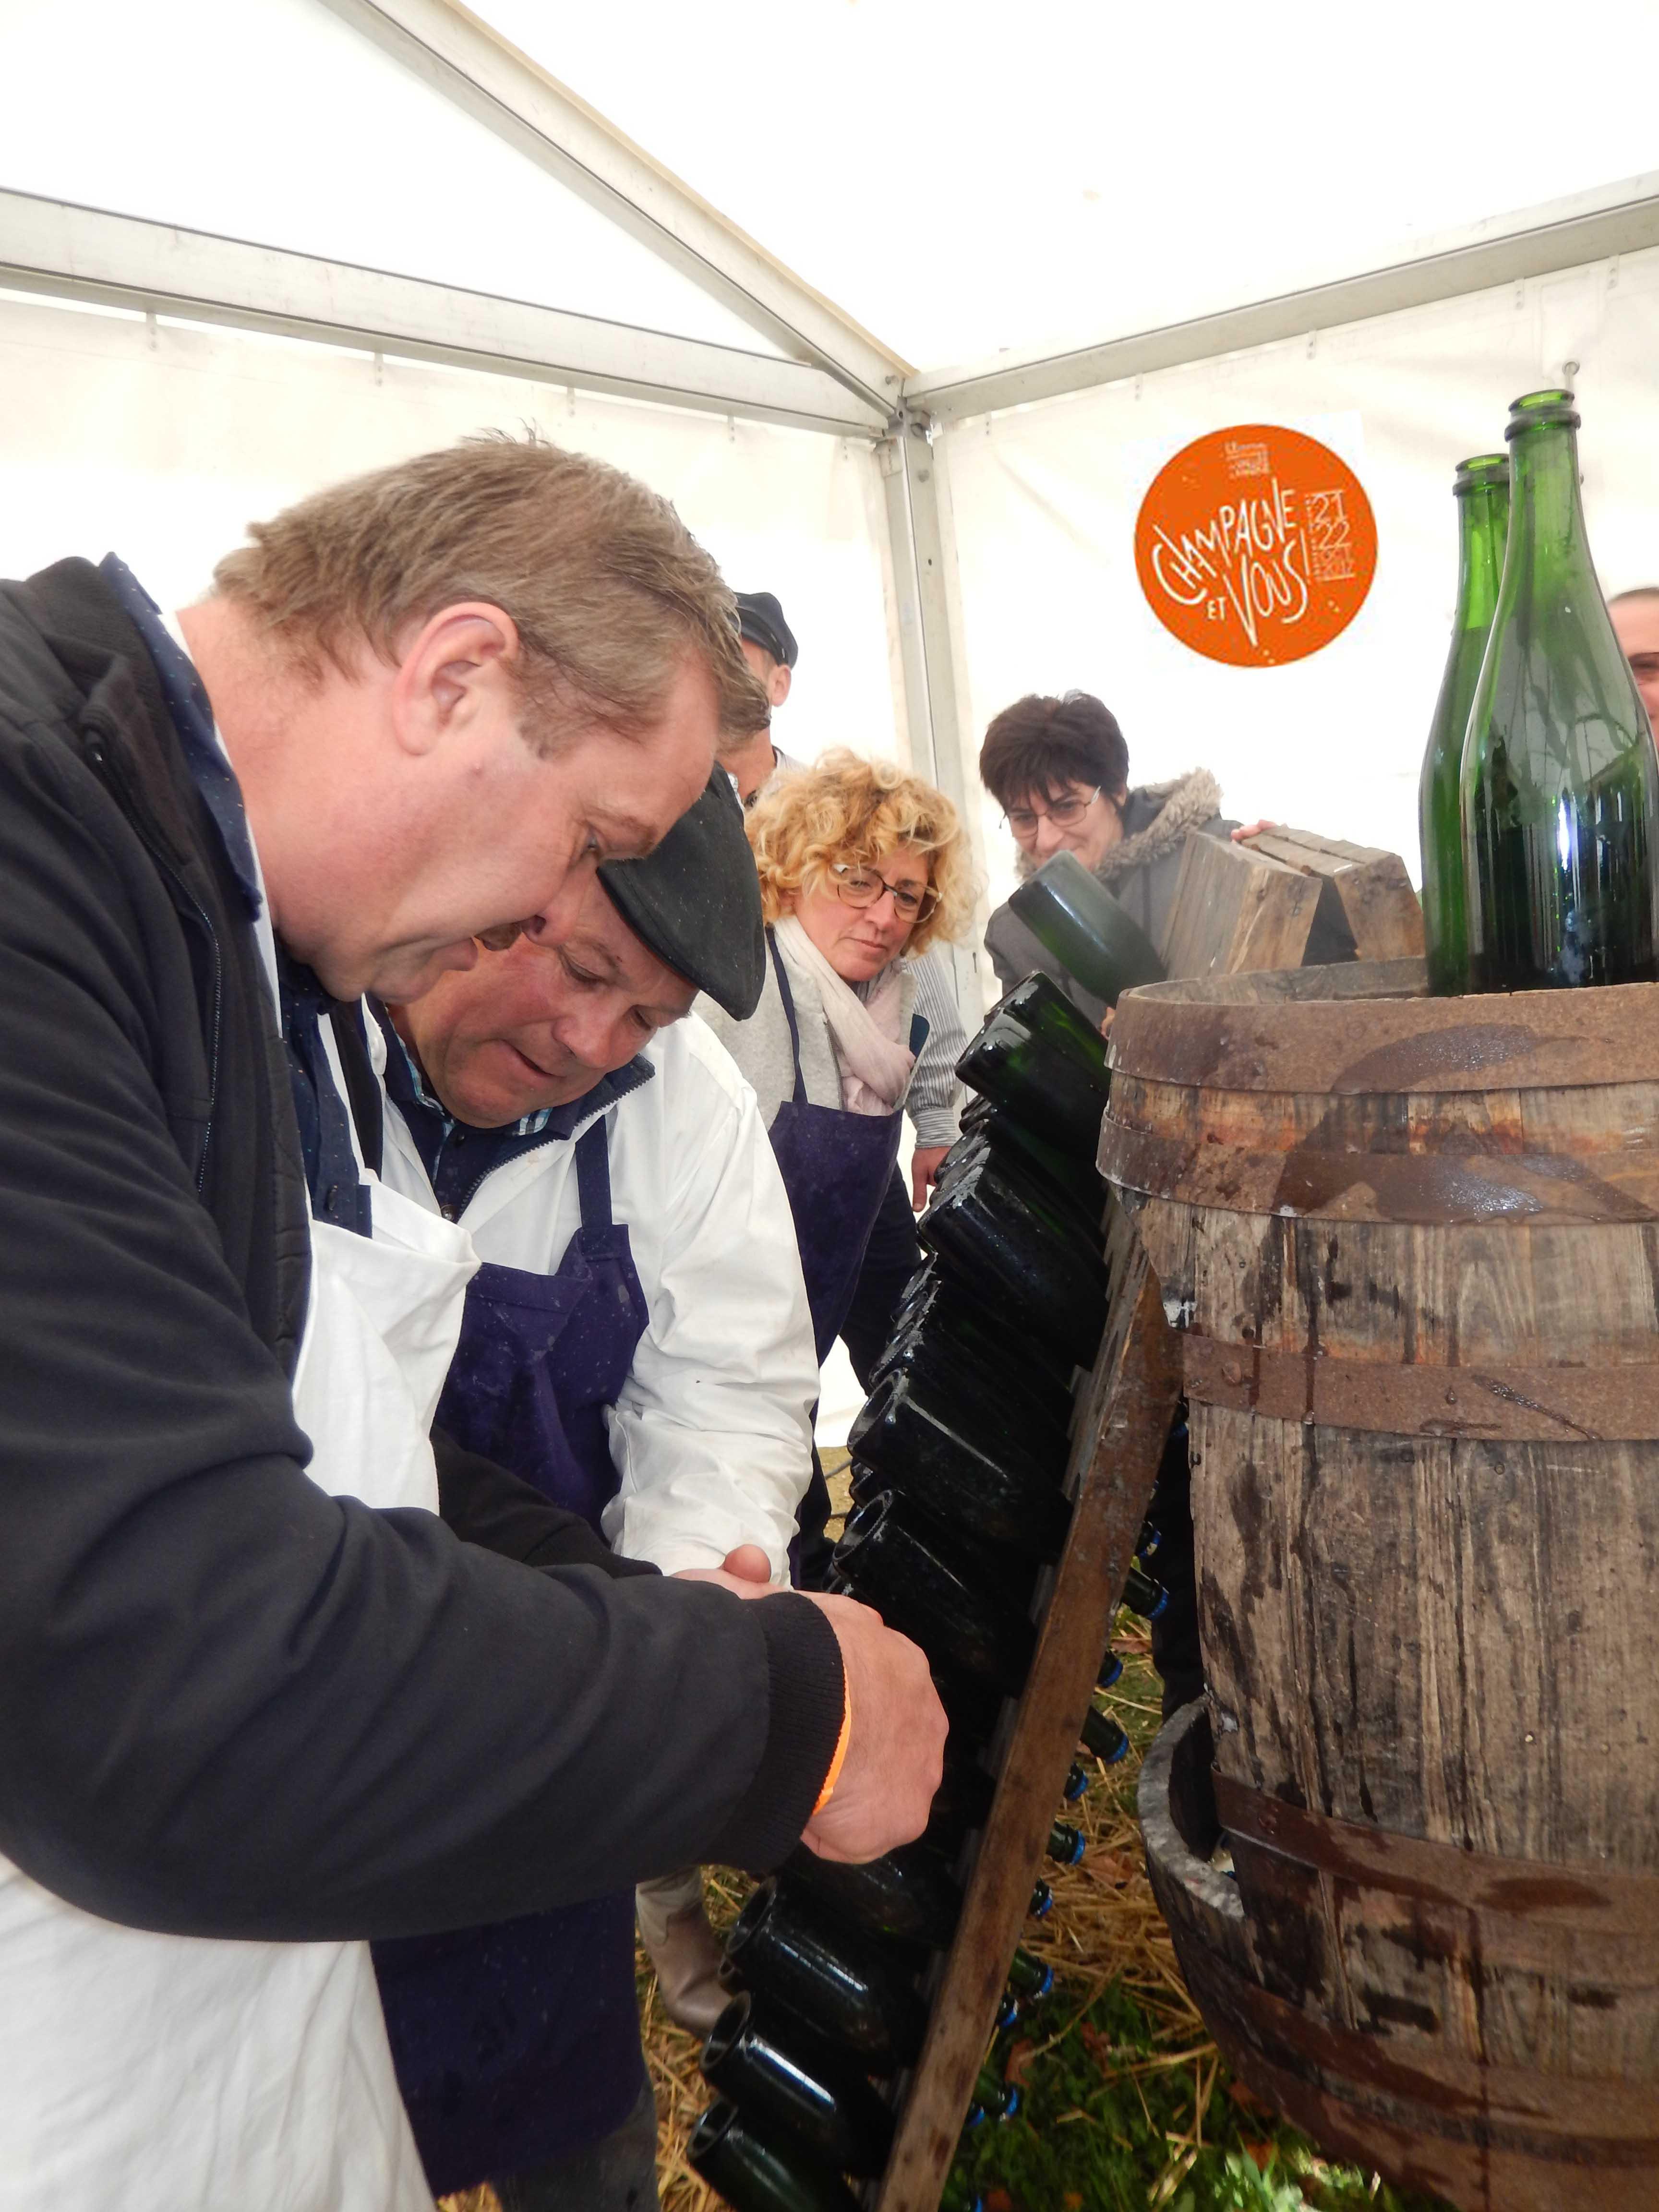 Demonstration of disgorging during the Champagne et Vous event at Château-Thierry. – © BC-MDT